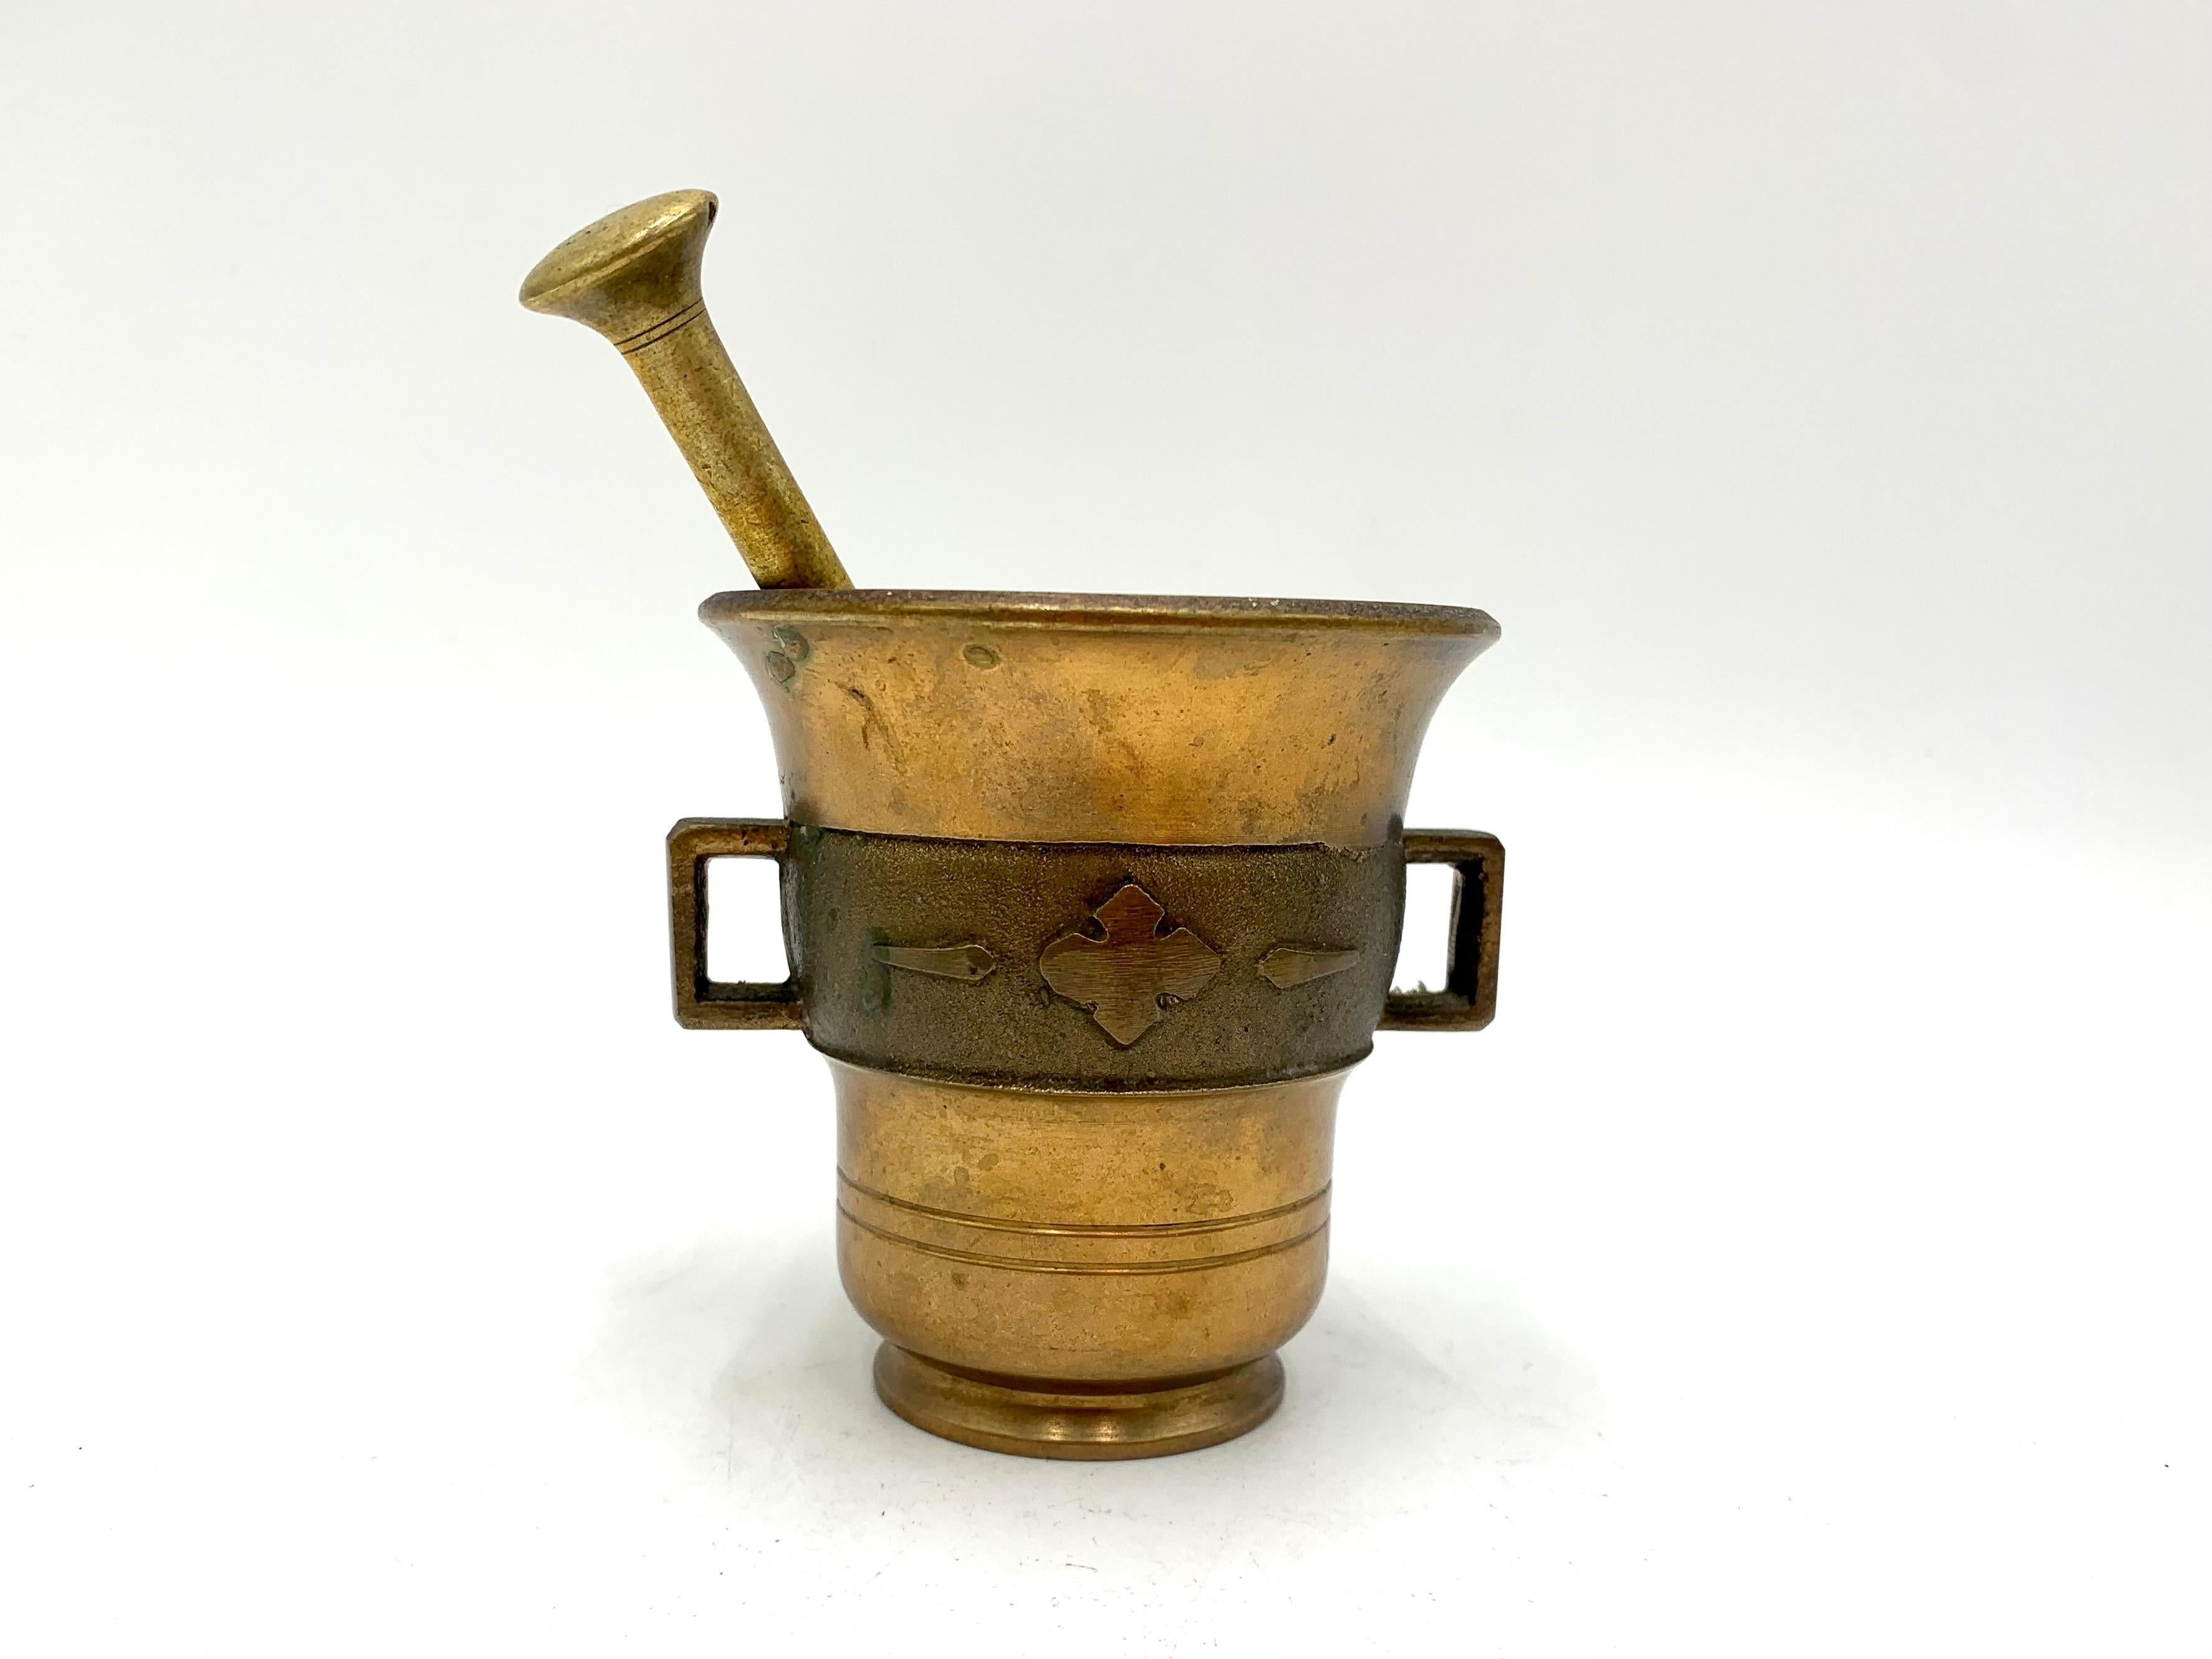 Brass mortar and pestle
Measures: height 8.5 cm, diameter 8.5 cm
Very good condition.
 